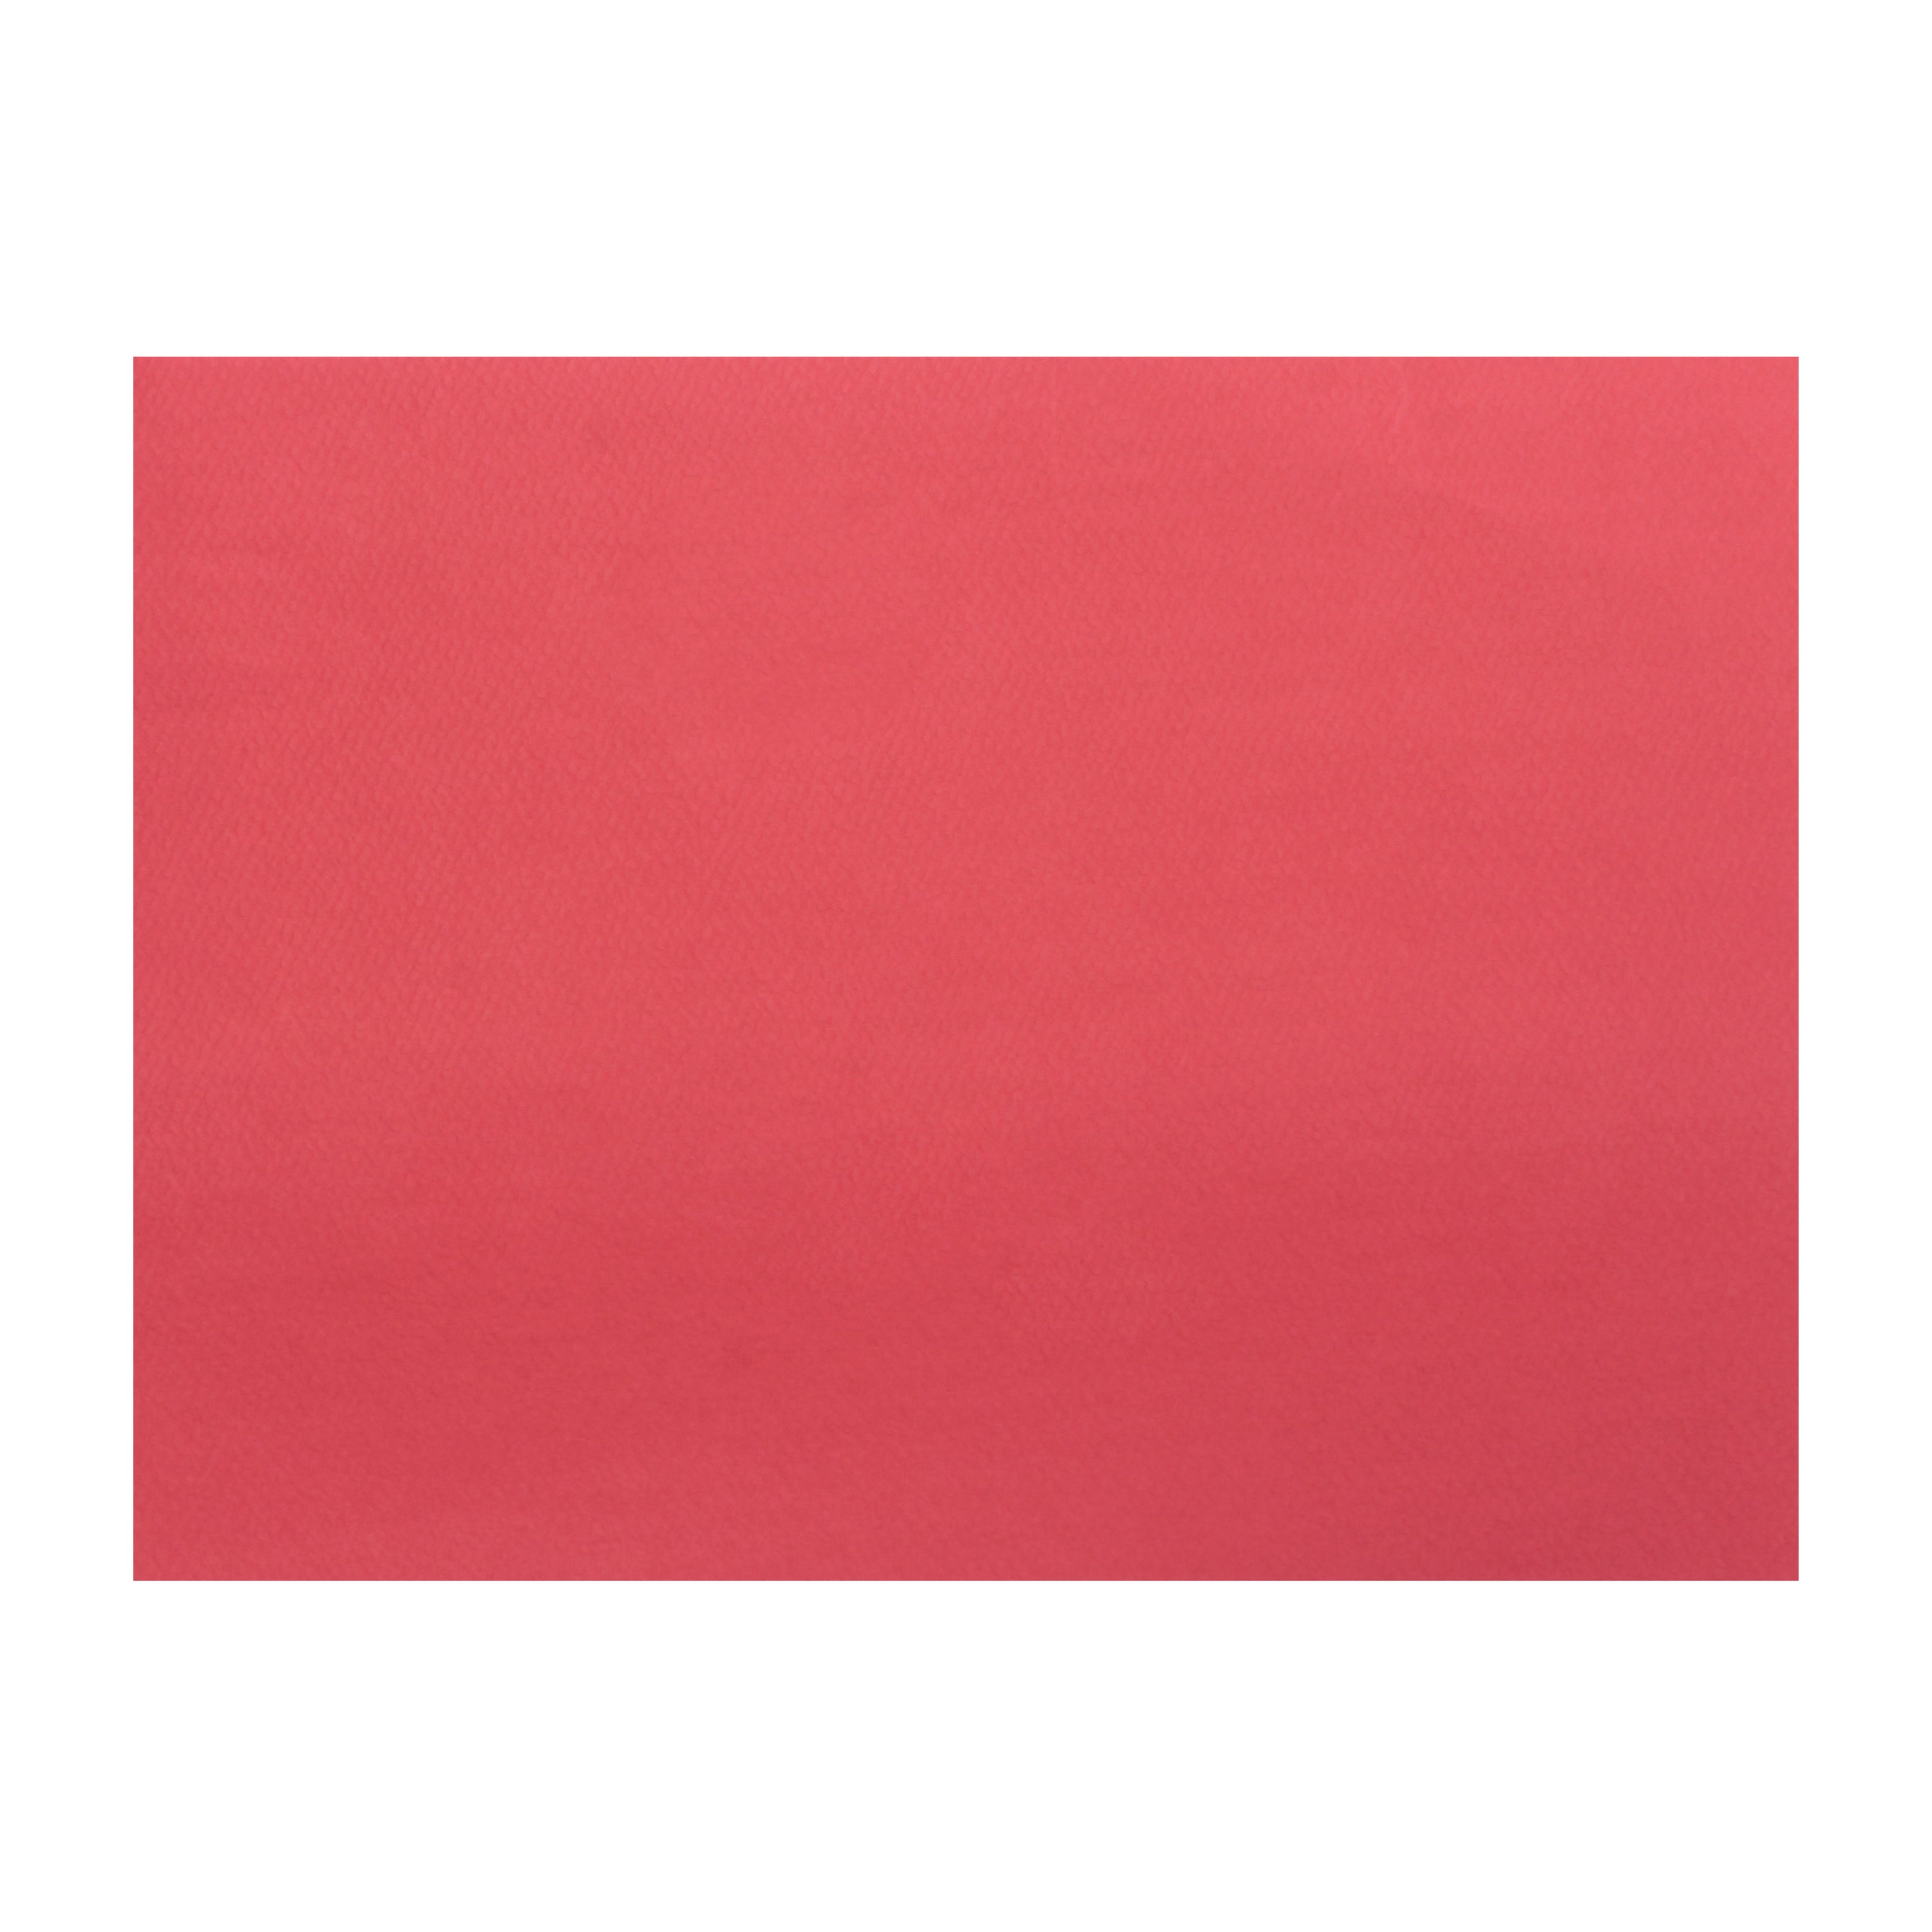 Punch Paper 80Gsm 31Inch X 21Inch Candy Red 1Sheet Lb